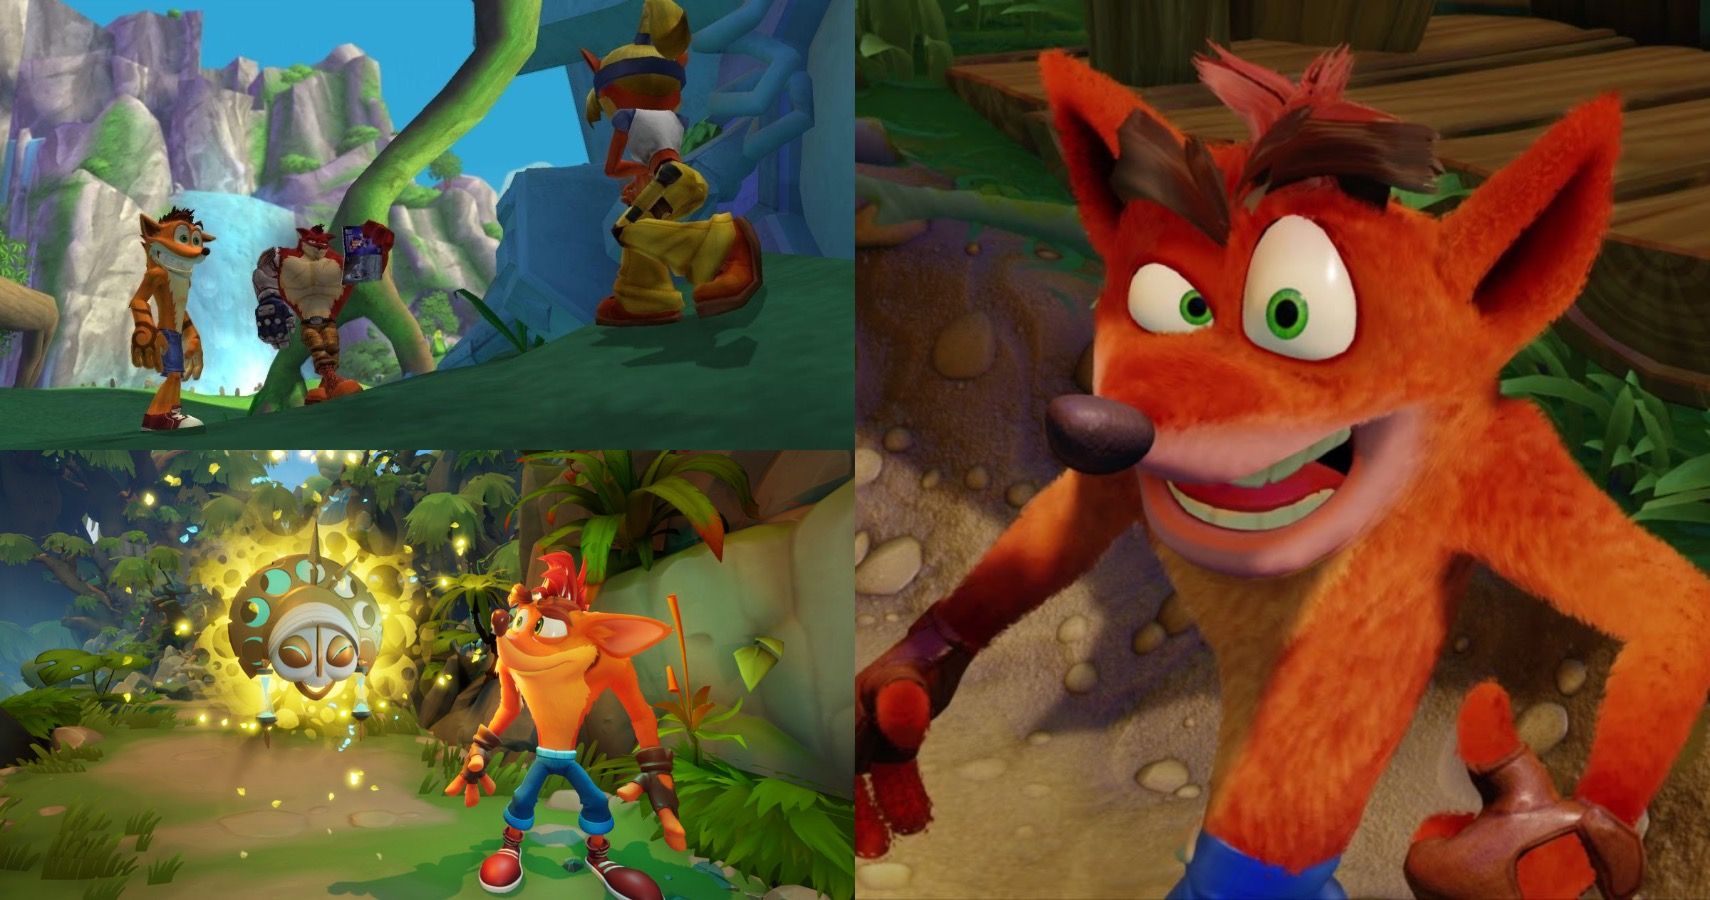 Every Crash Game, Difficulty